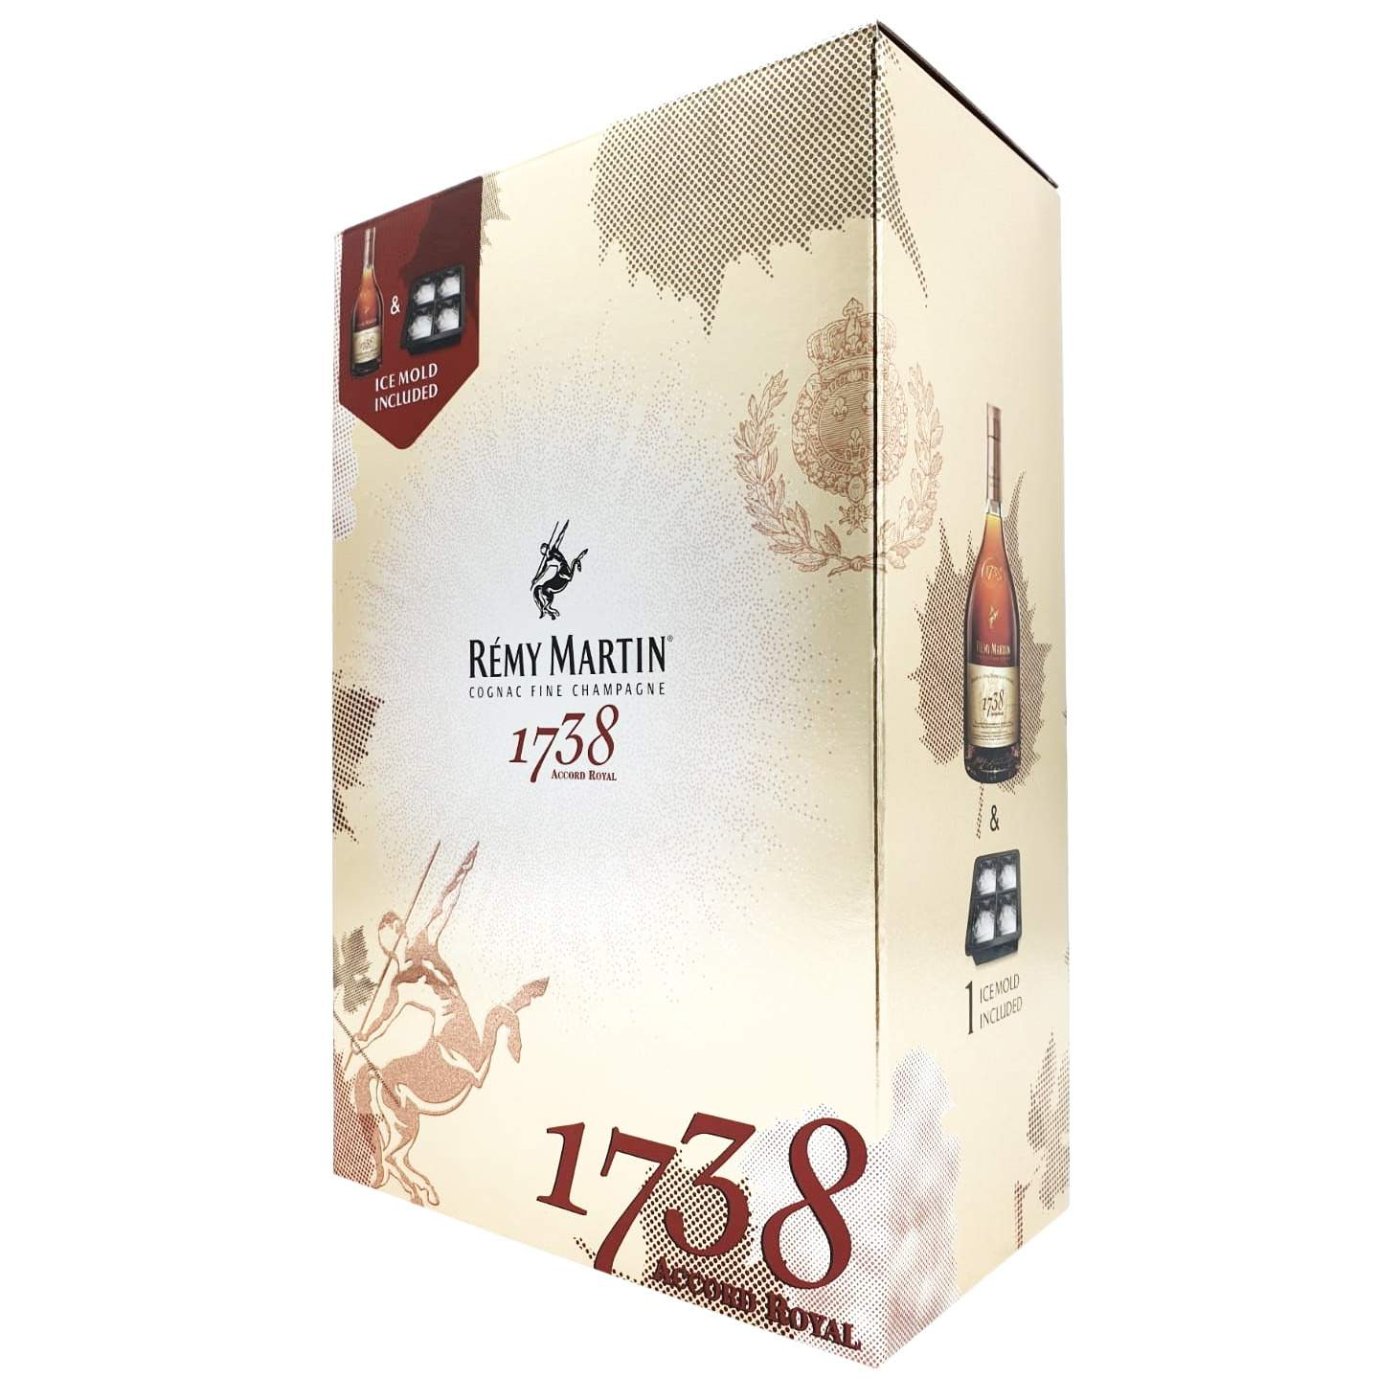 Rémy Martin - 1738 Accord Royal Giftpack Ice Mould 70cl